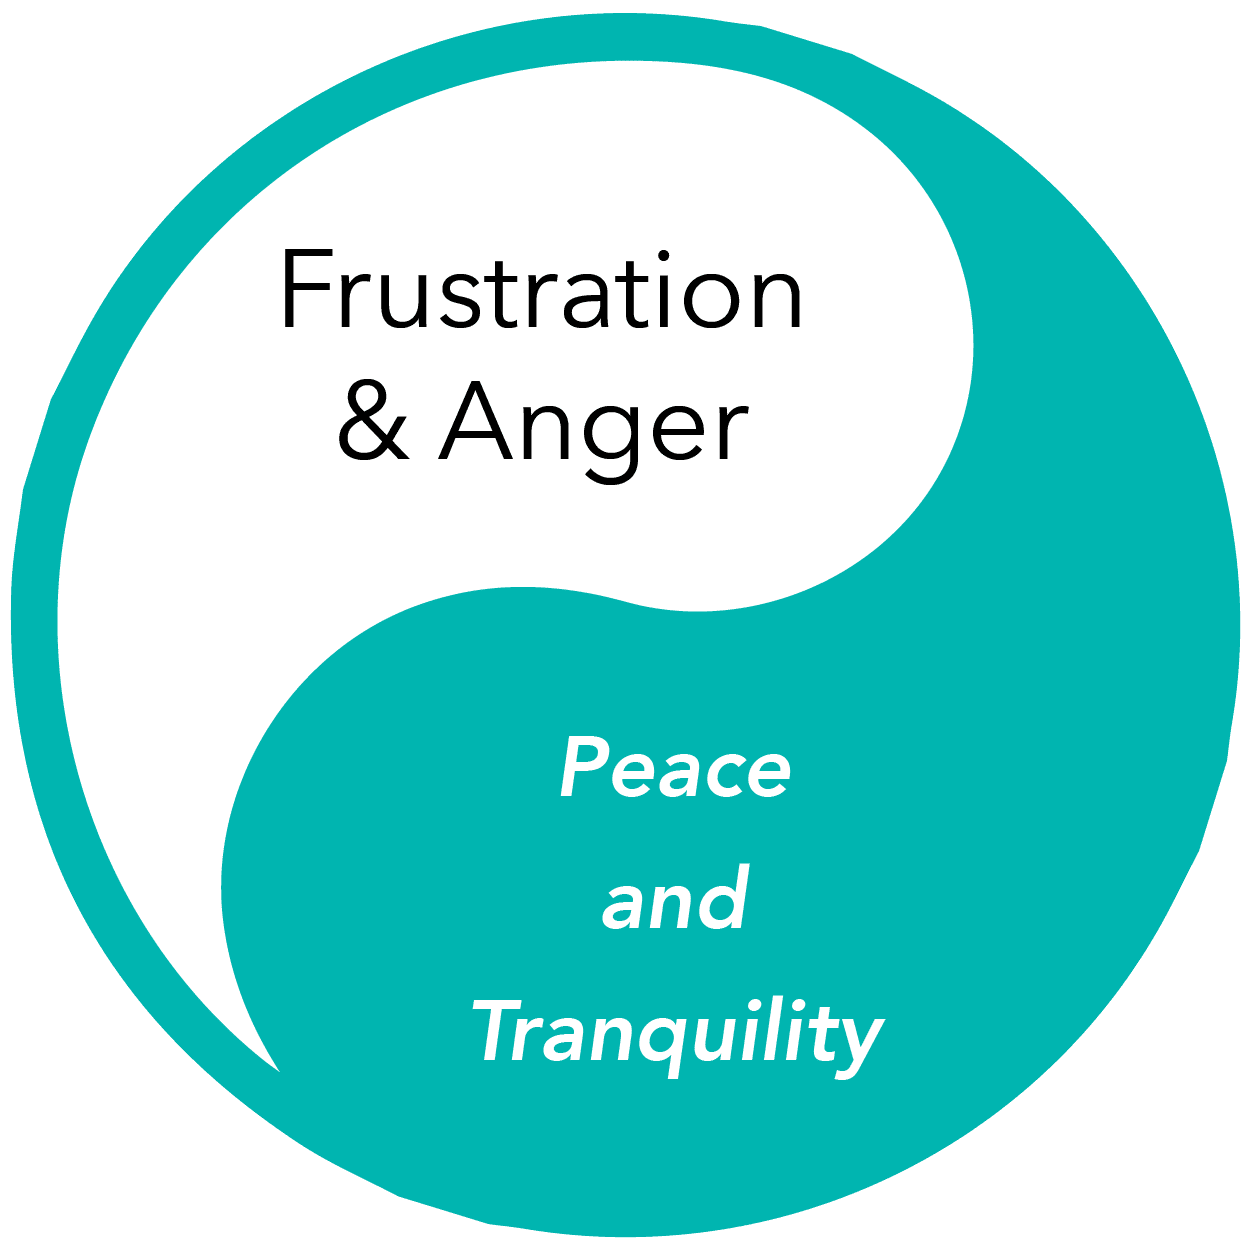 Frustration & Anger: Peace and Tranquility